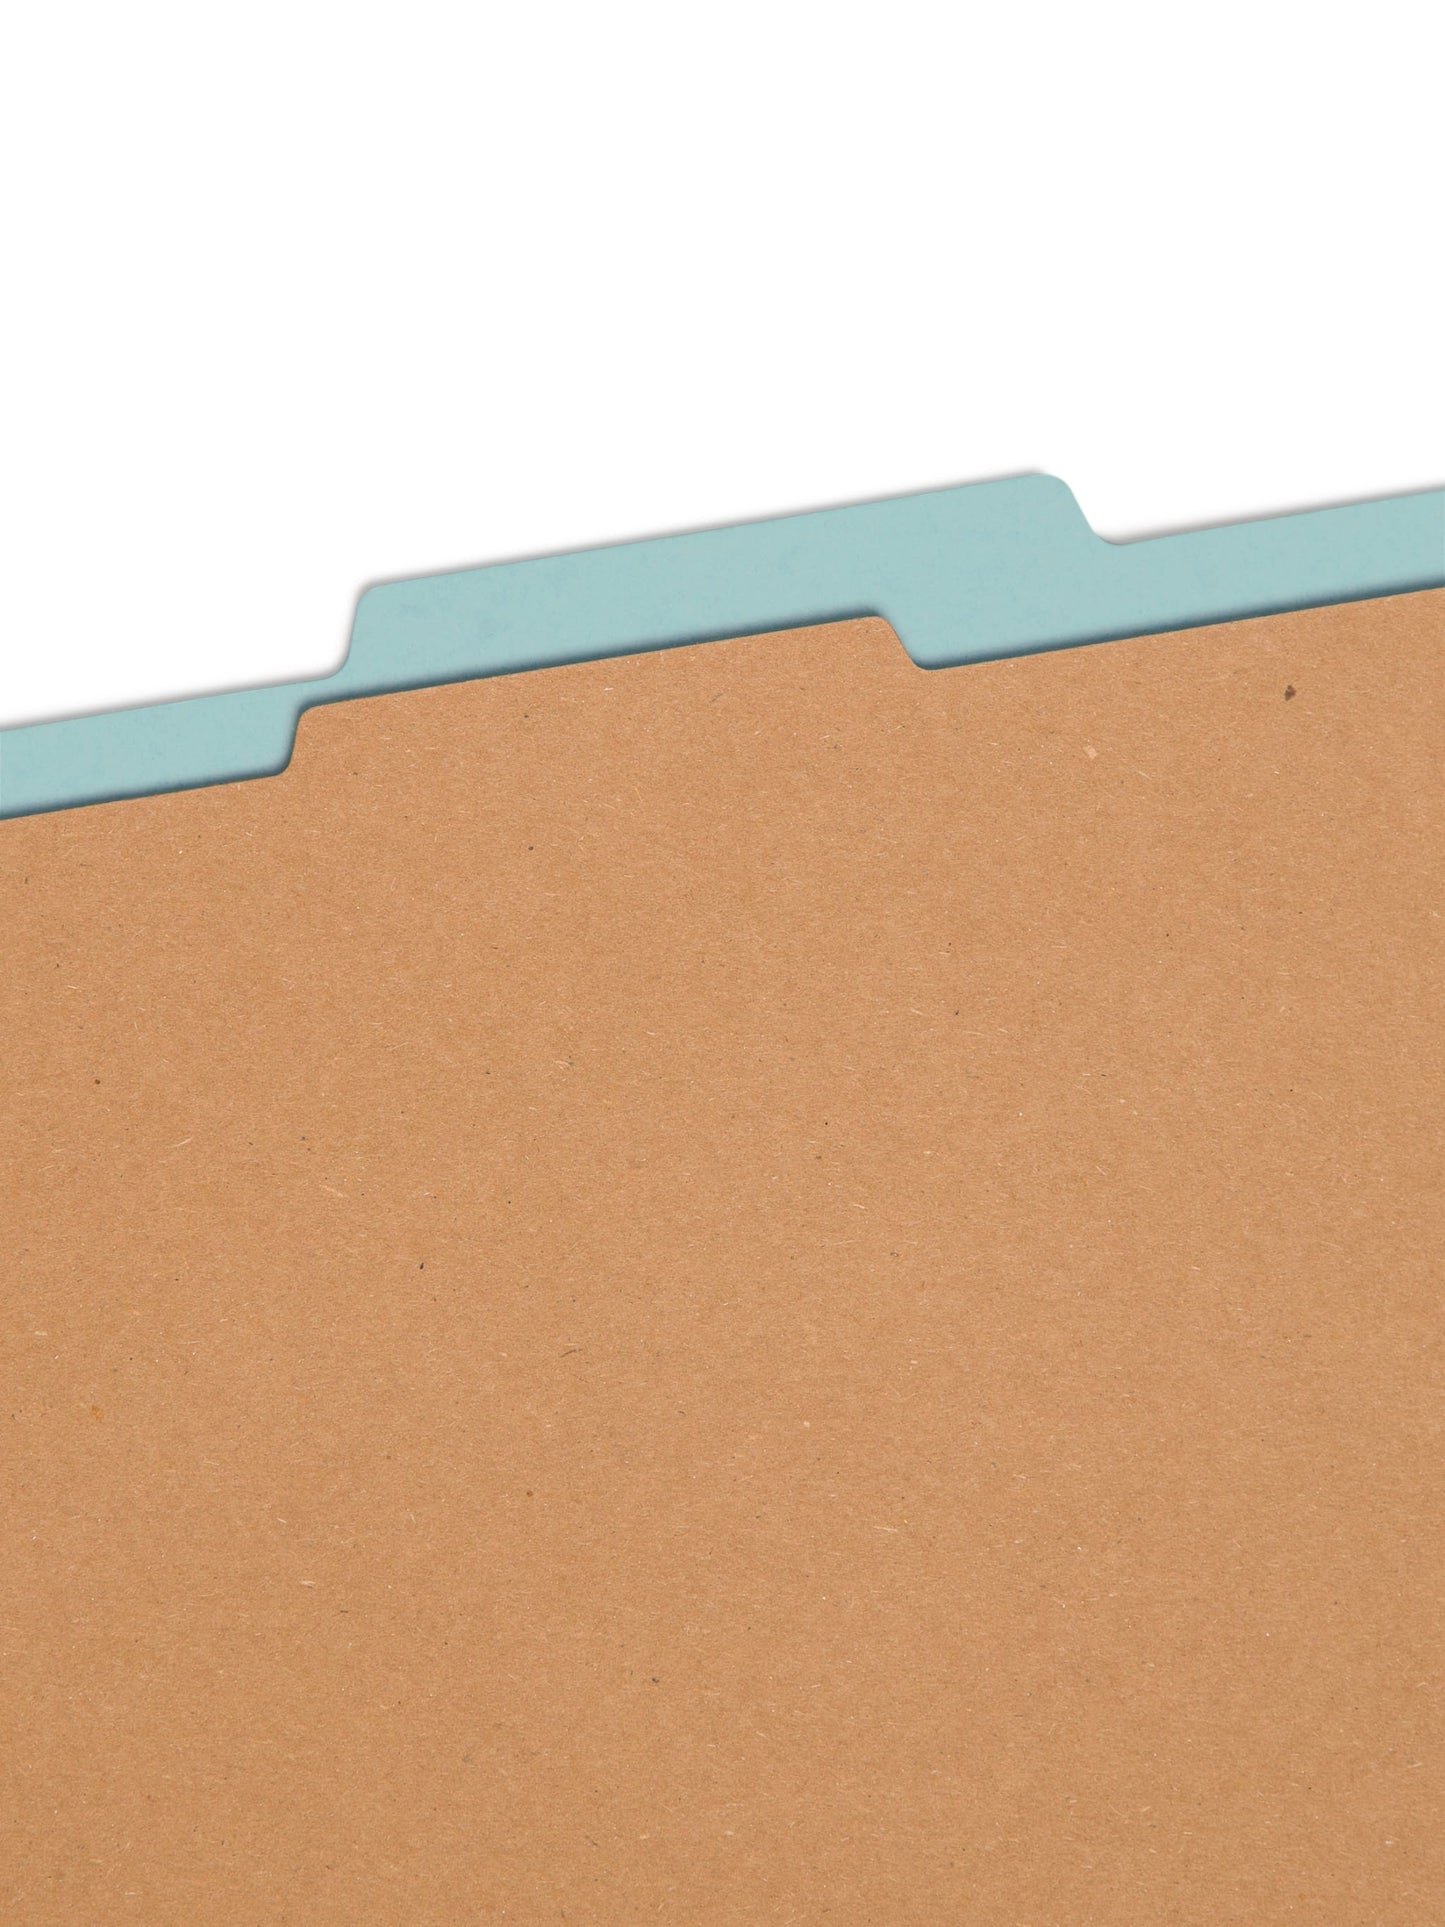 100% Recycled Value Pressboard Colored Classification Folders, 2/5 Cut Tab, 2 inch Expansion, 1 Divider, Blue Color, Letter Size, Set of 0, 30086486211803